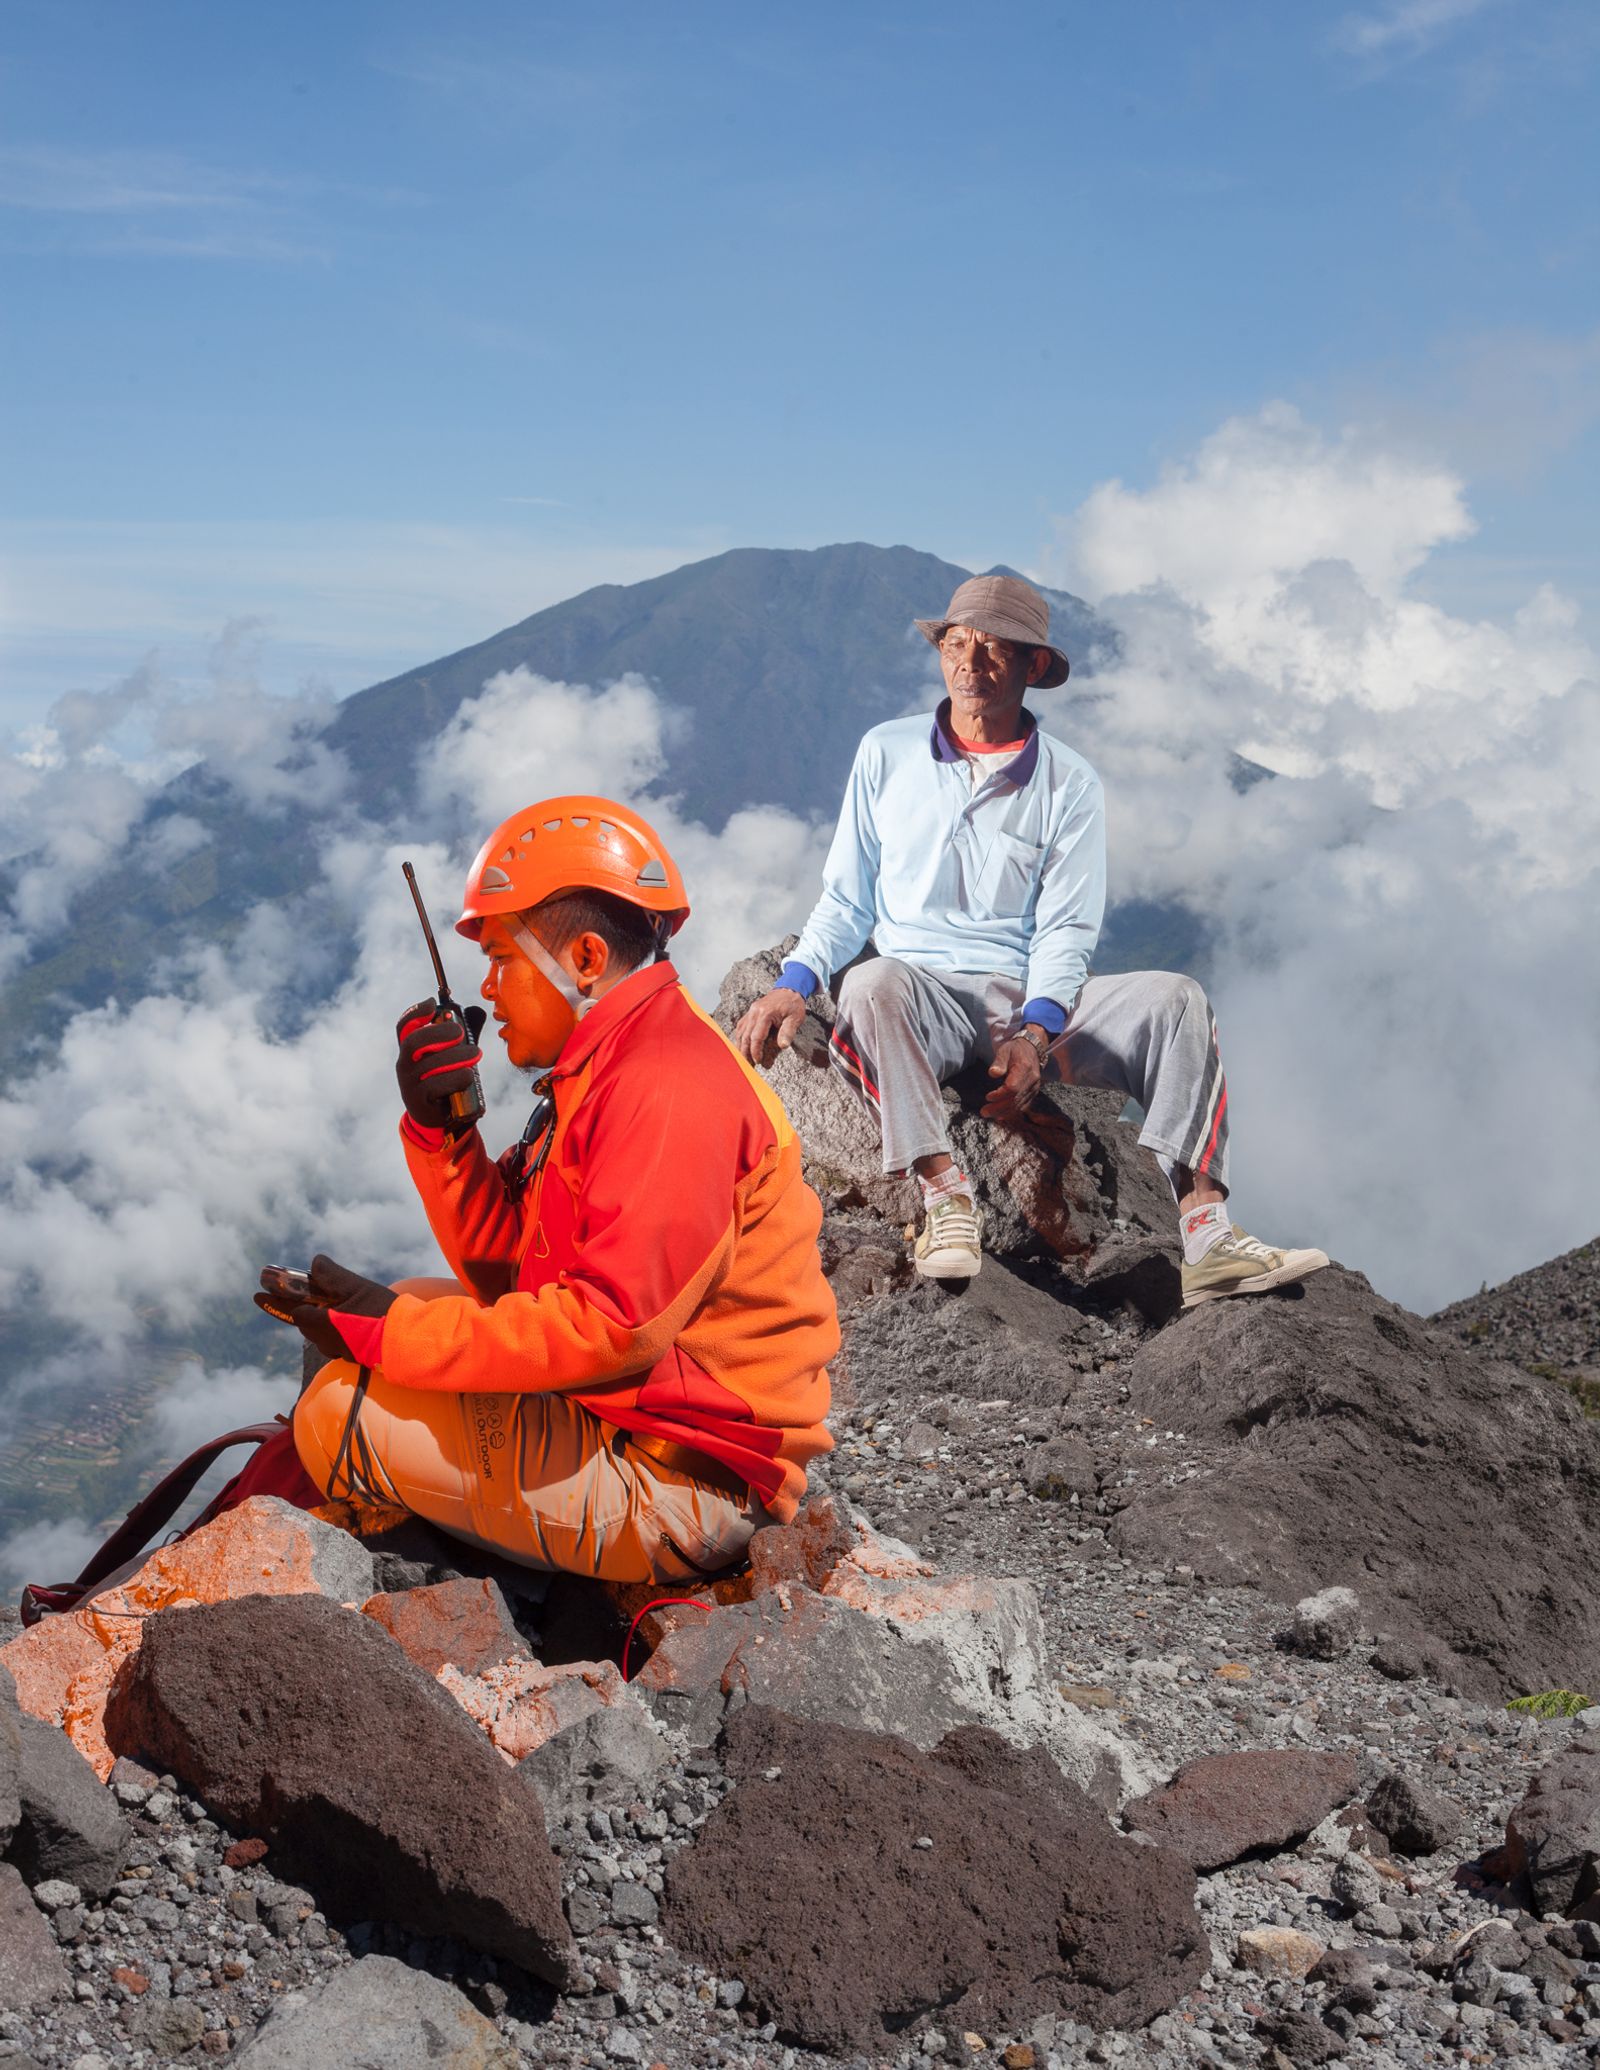 © Hahn Hartung - Noer Cholik, a volcanologist and his porter working on top of Mount Merapi